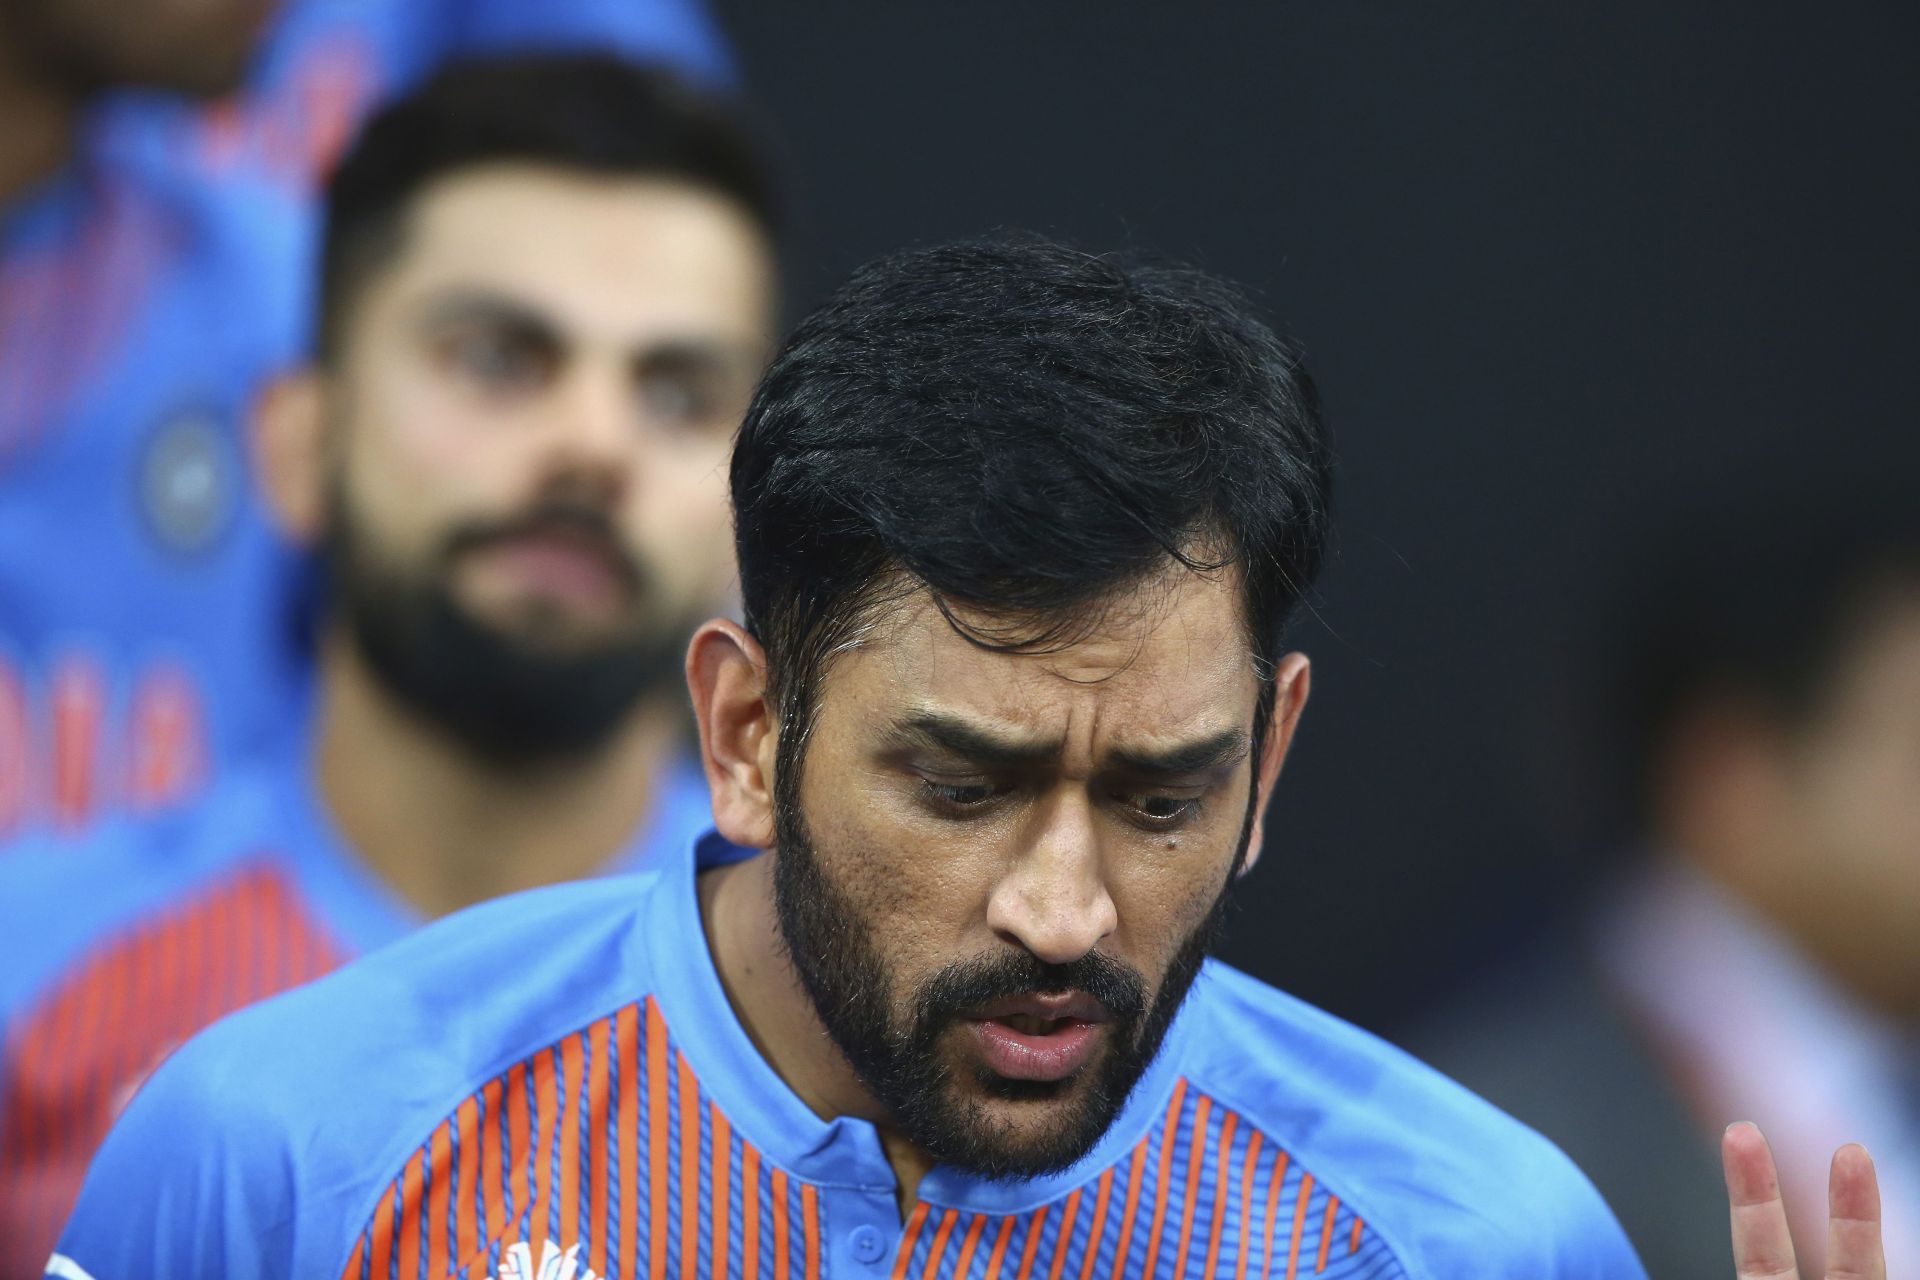 MS Dhoni has retired from all three formats of international cricket